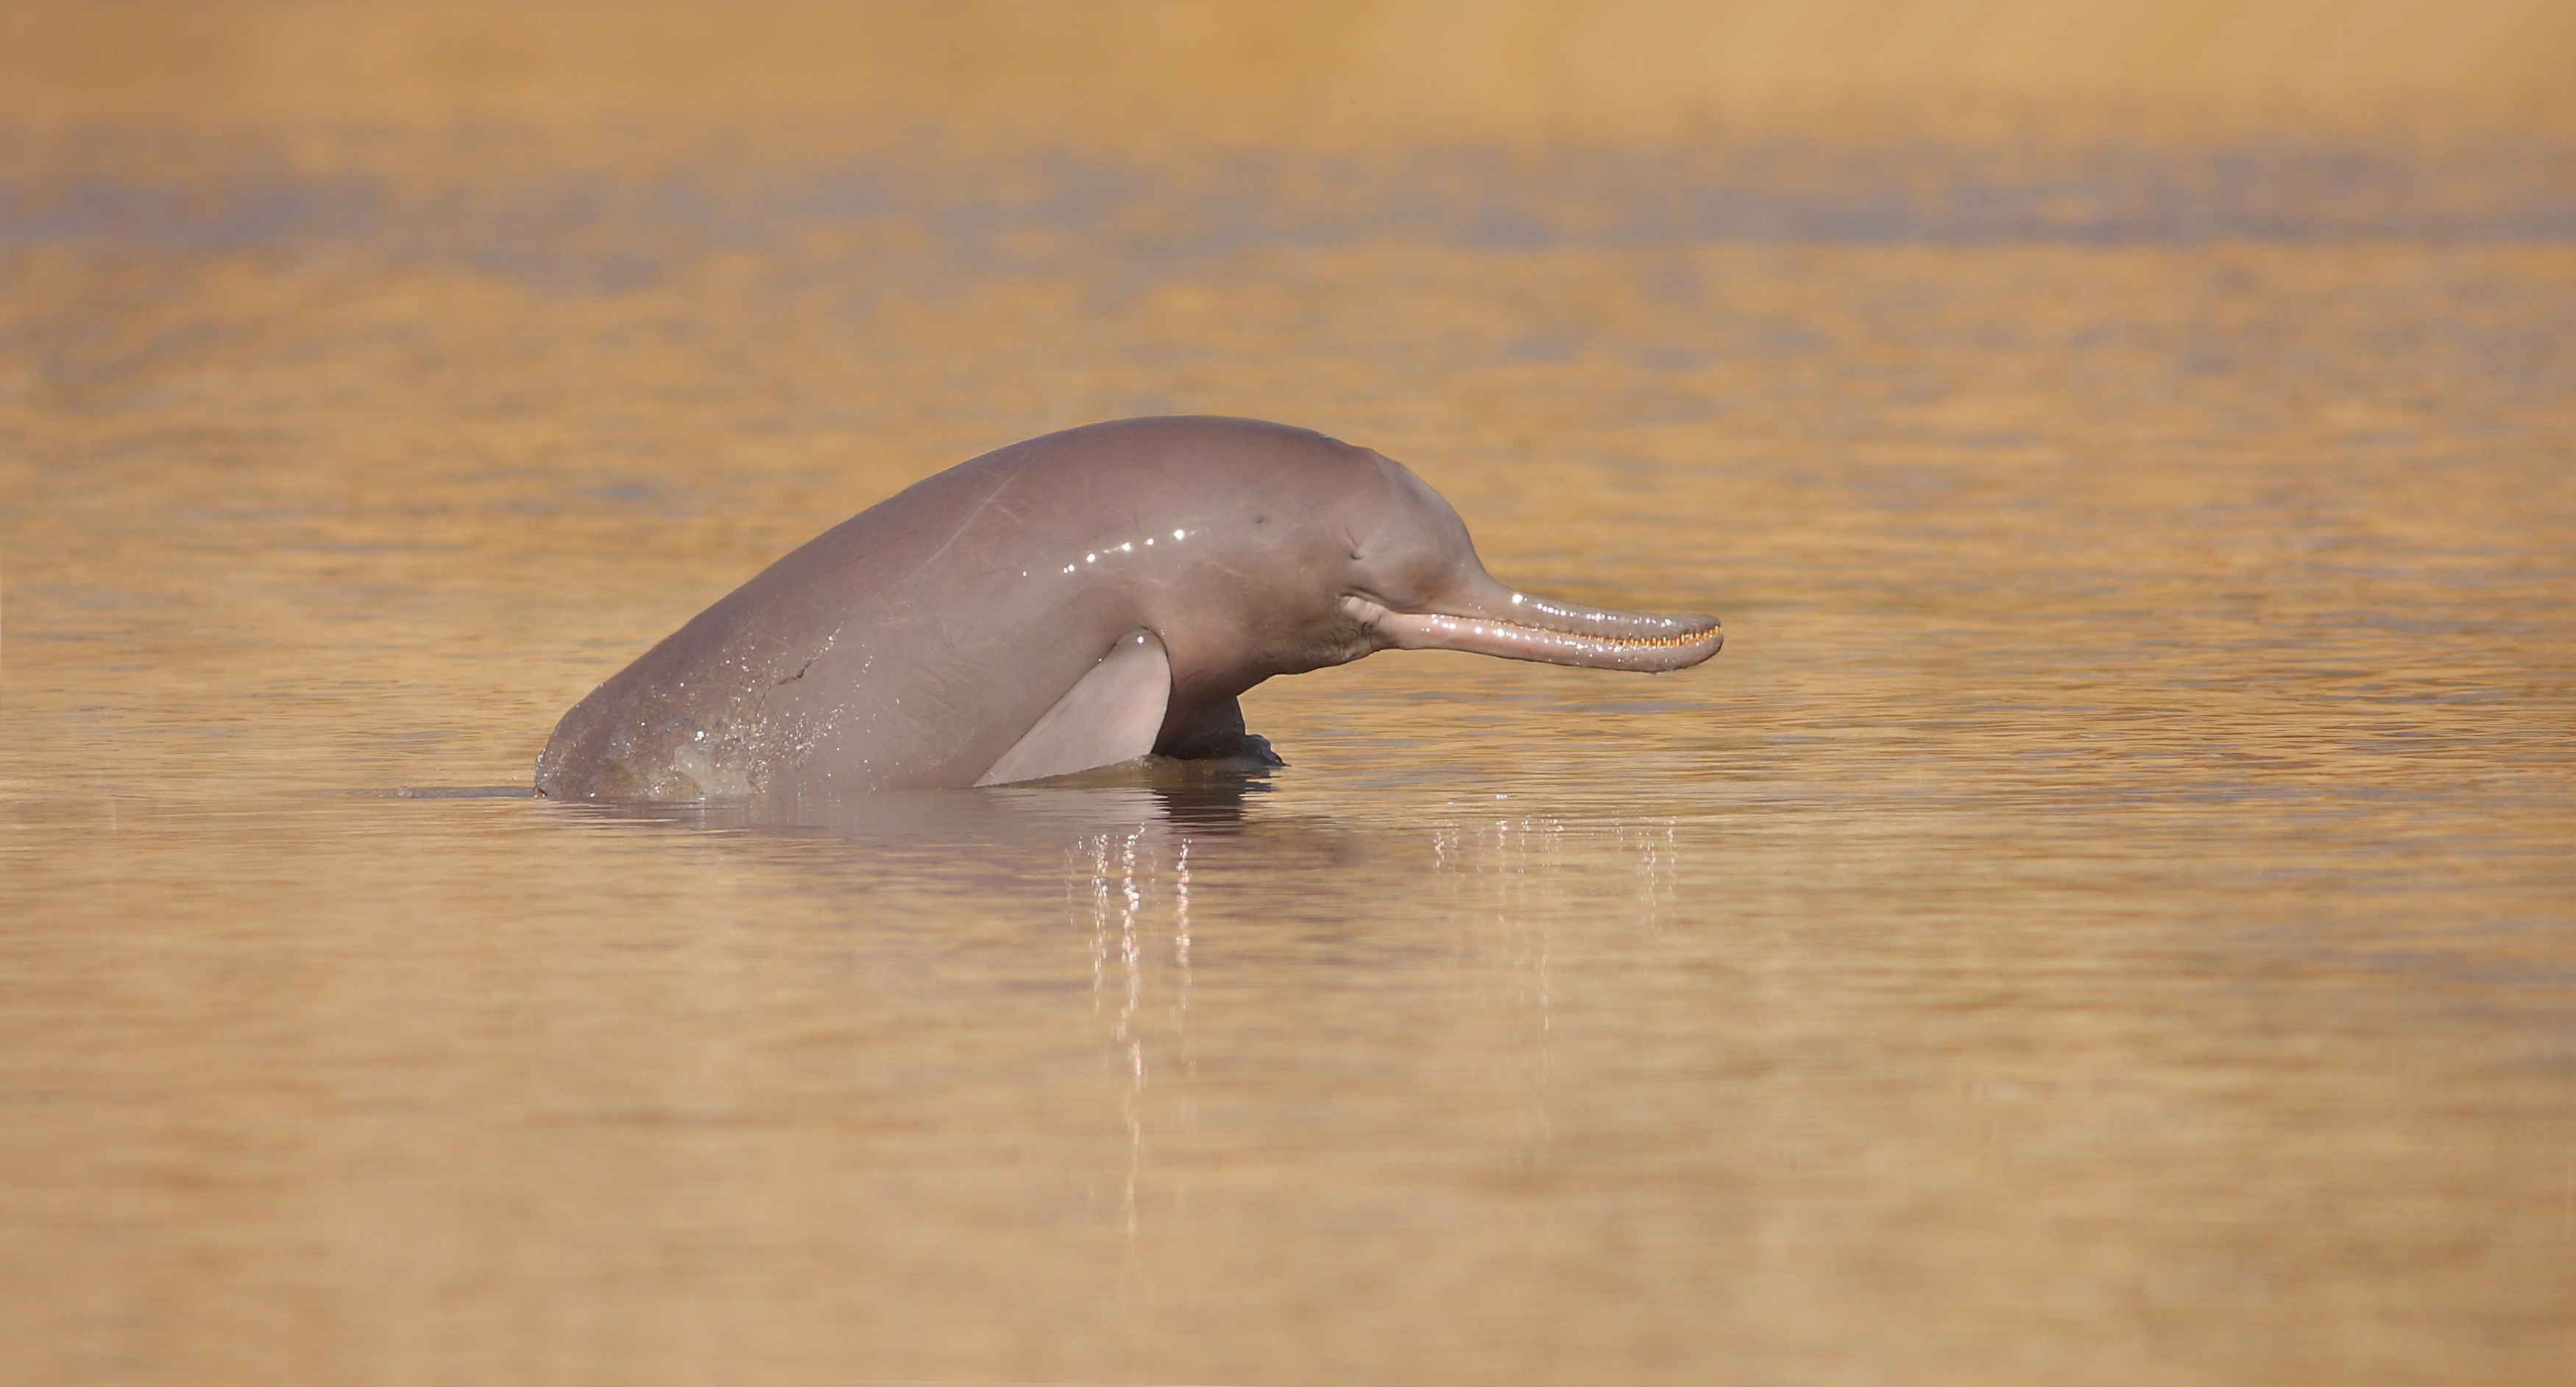 How many Indus River dolphins are left?